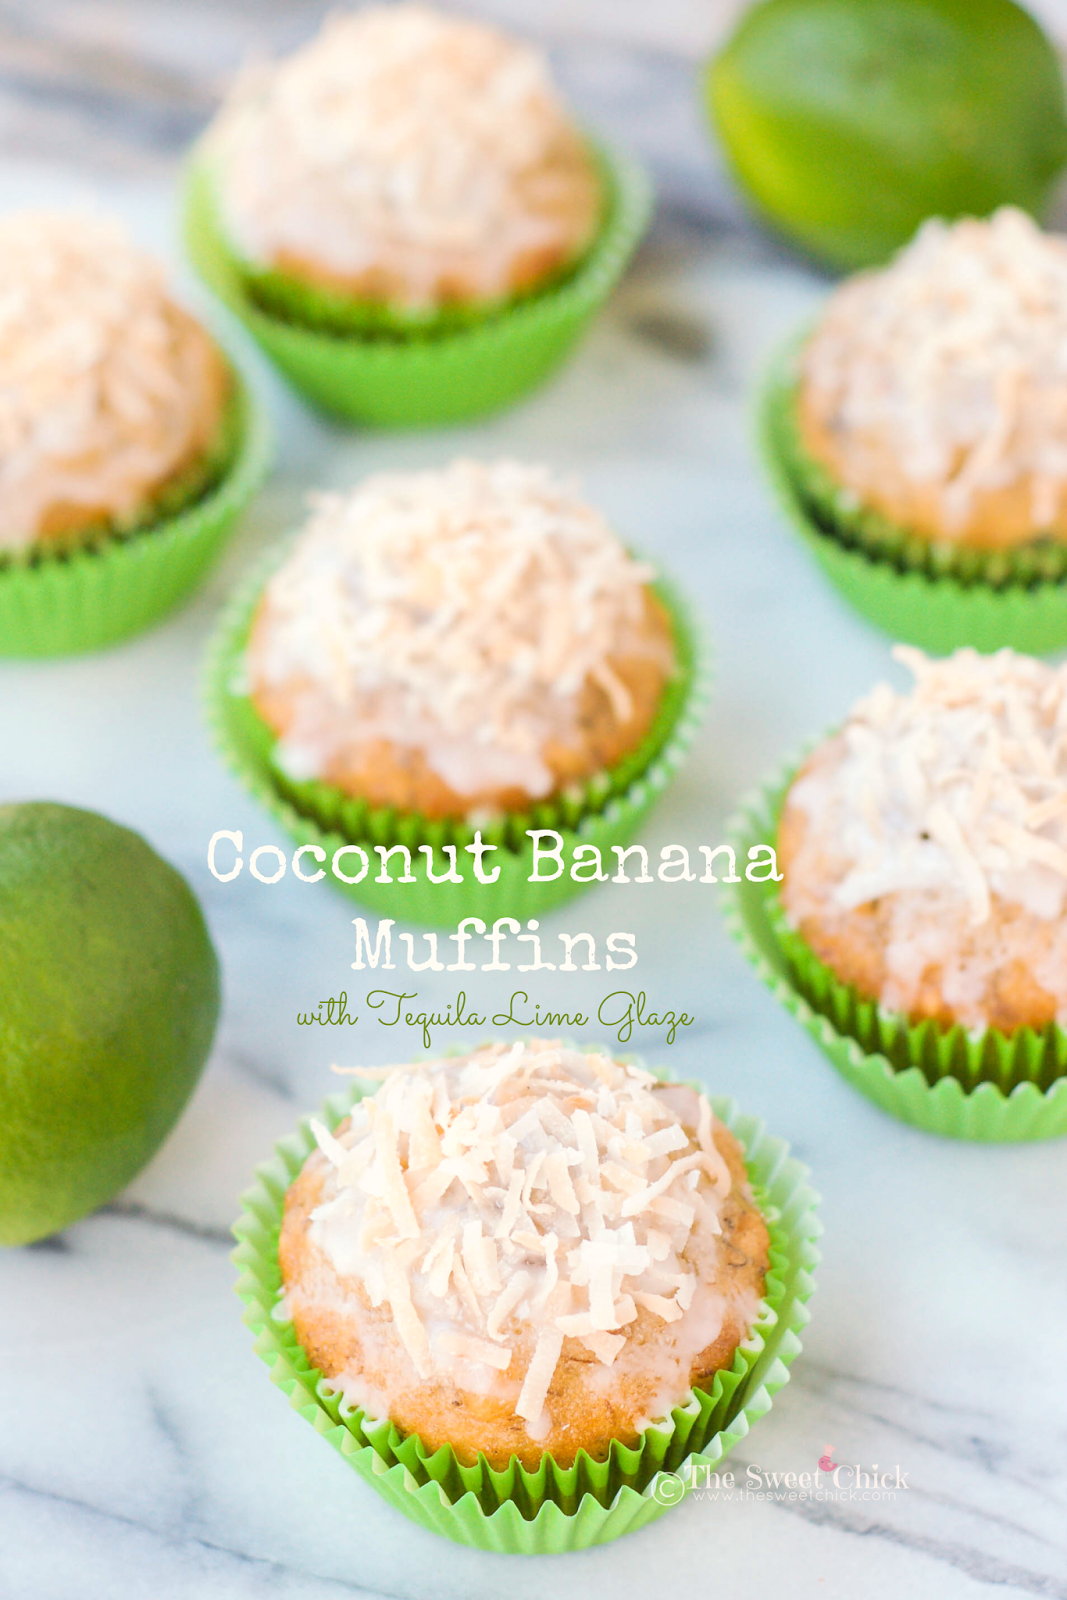 Coconut Banana Muffins by The Sweet Chick